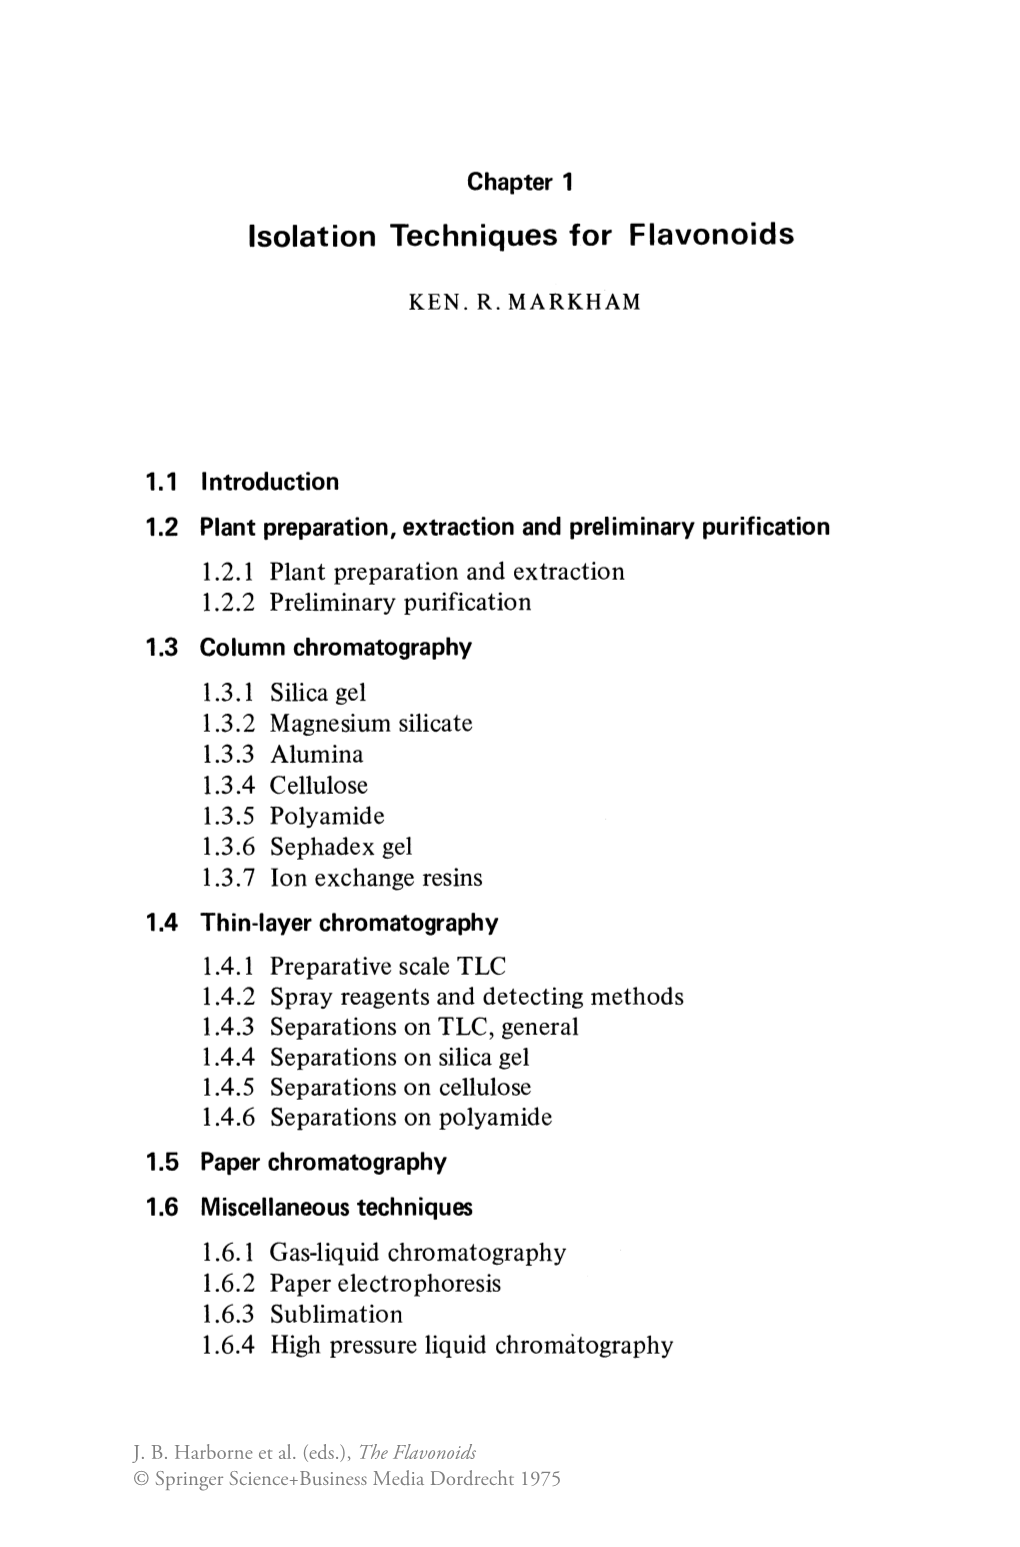 ISOLATION TECHNIQUES for FLAVONOIDS 3 the Plant Material Into Boiling Solvent Or by Rapid Drying Prior to Extraction (Seshadri, 1962)